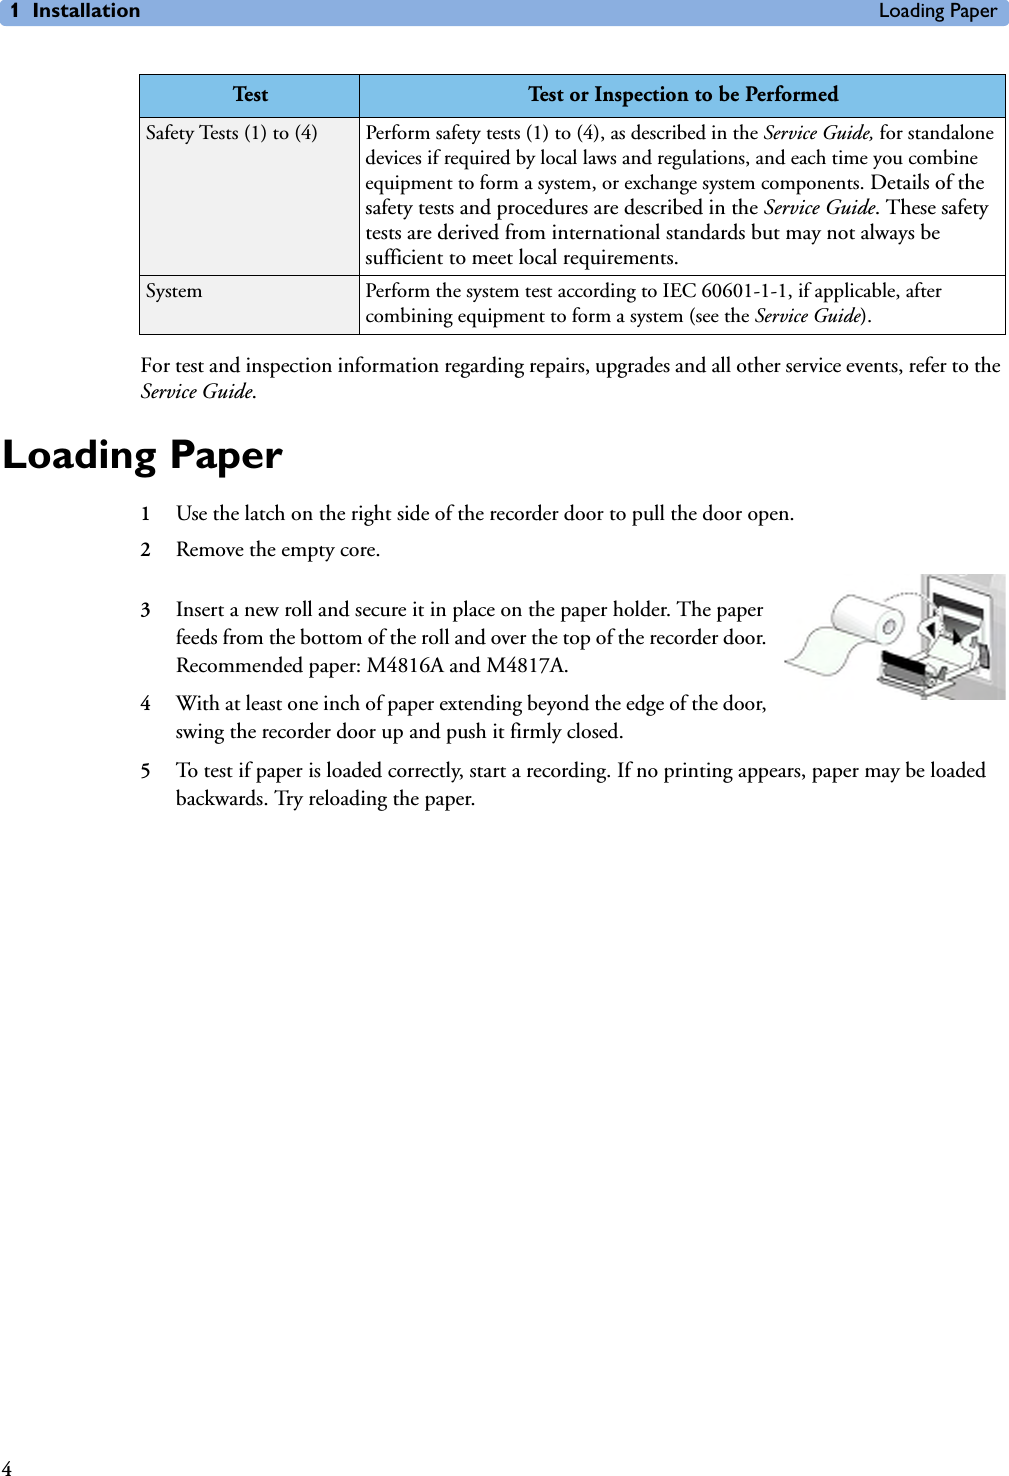 1 Installation Loading Paper4For test and inspection information regarding repairs, upgrades and all other service events, refer to the Service Guide.Loading Paper1Use the latch on the right side of the recorder door to pull the door open.2Remove the empty core.3Insert a new roll and secure it in place on the paper holder. The paper feeds from the bottom of the roll and over the top of the recorder door. Recommended paper: M4816A and M4817A. 4With at least one inch of paper extending beyond the edge of the door, swing the recorder door up and push it firmly closed.5To test if paper is loaded correctly, start a recording. If no printing appears, paper may be loaded backwards. Try reloading the paper.Safety Tests (1) to (4) Perform safety tests (1) to (4), as described in the Service Guide, for standalone devices if required by local laws and regulations, and each time you combine equipment to form a system, or exchange system components. Details of the safety tests and procedures are described in the Service Guide. These safety tests are derived from international standards but may not always be sufficient to meet local requirements.System Perform the system test according to IEC 60601-1-1, if applicable, after combining equipment to form a system (see the Service Guide).Te st  Test or Inspection to be Performed